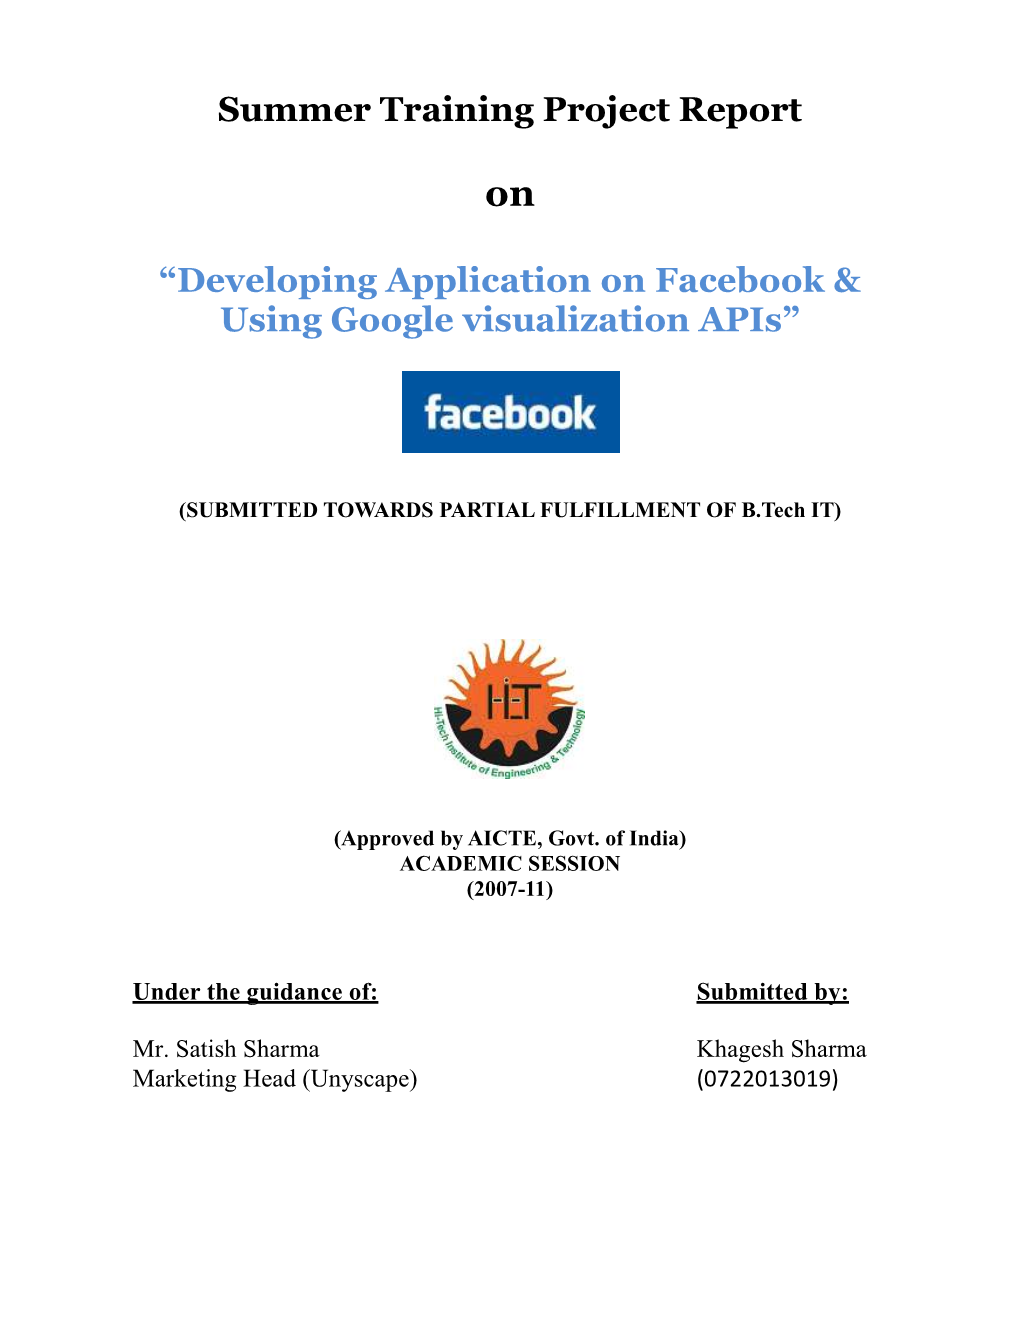 Developing Application on Facebook & Using Google